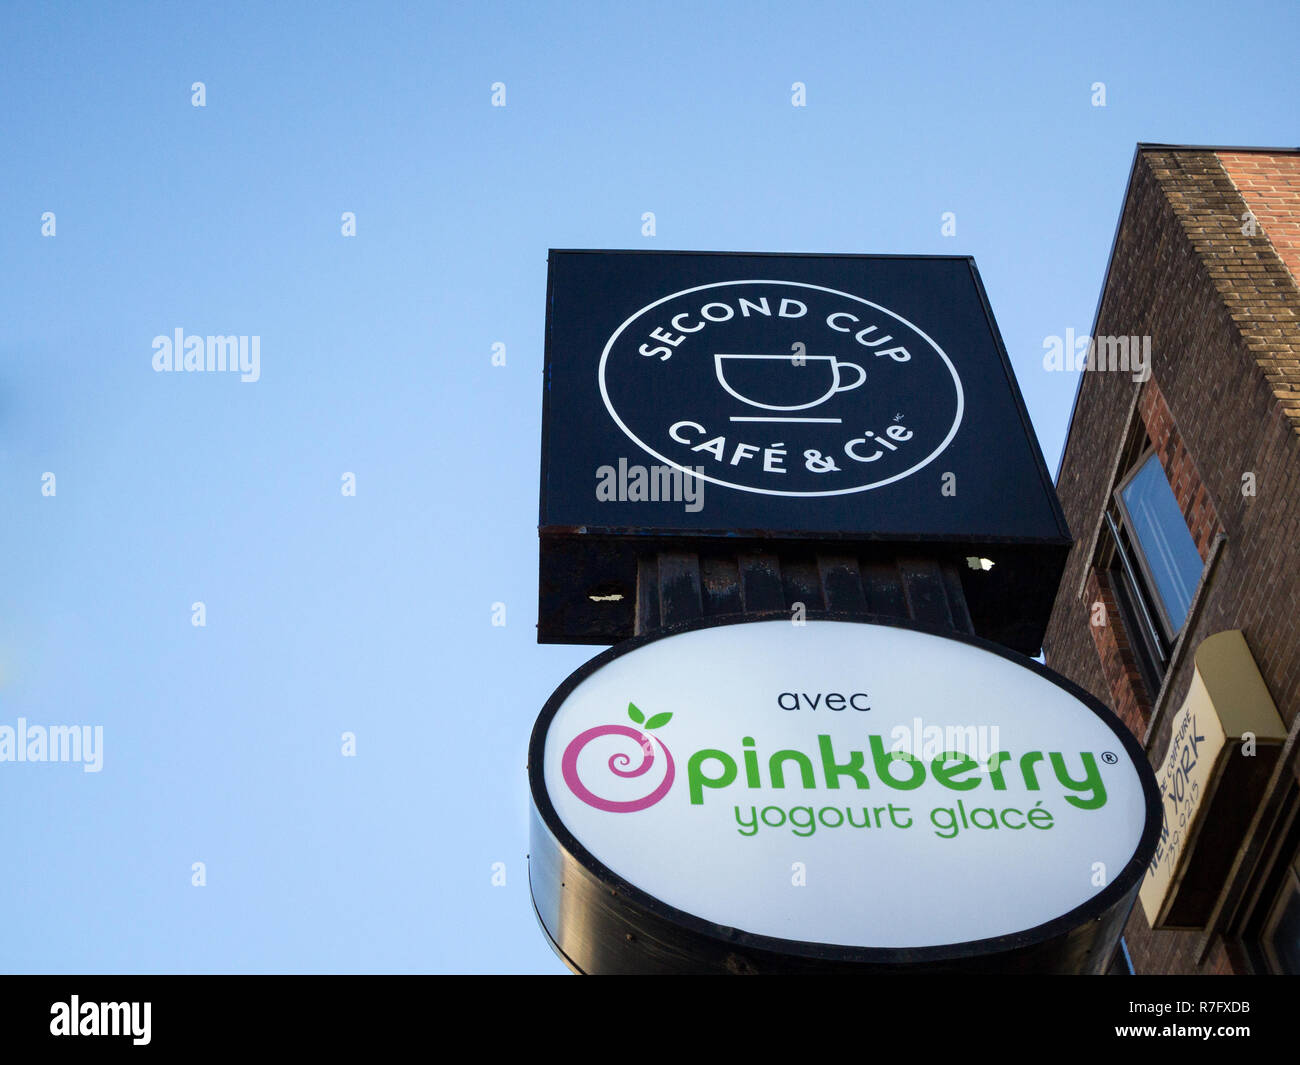 https://c8.alamy.com/comp/R7FXDB/montreal-canada-november-4-2018-second-cup-coffee-logo-in-front-of-their-local-cafe-in-downtown-montreal-quebec-second-cup-coffee-is-a-canadian-R7FXDB.jpg